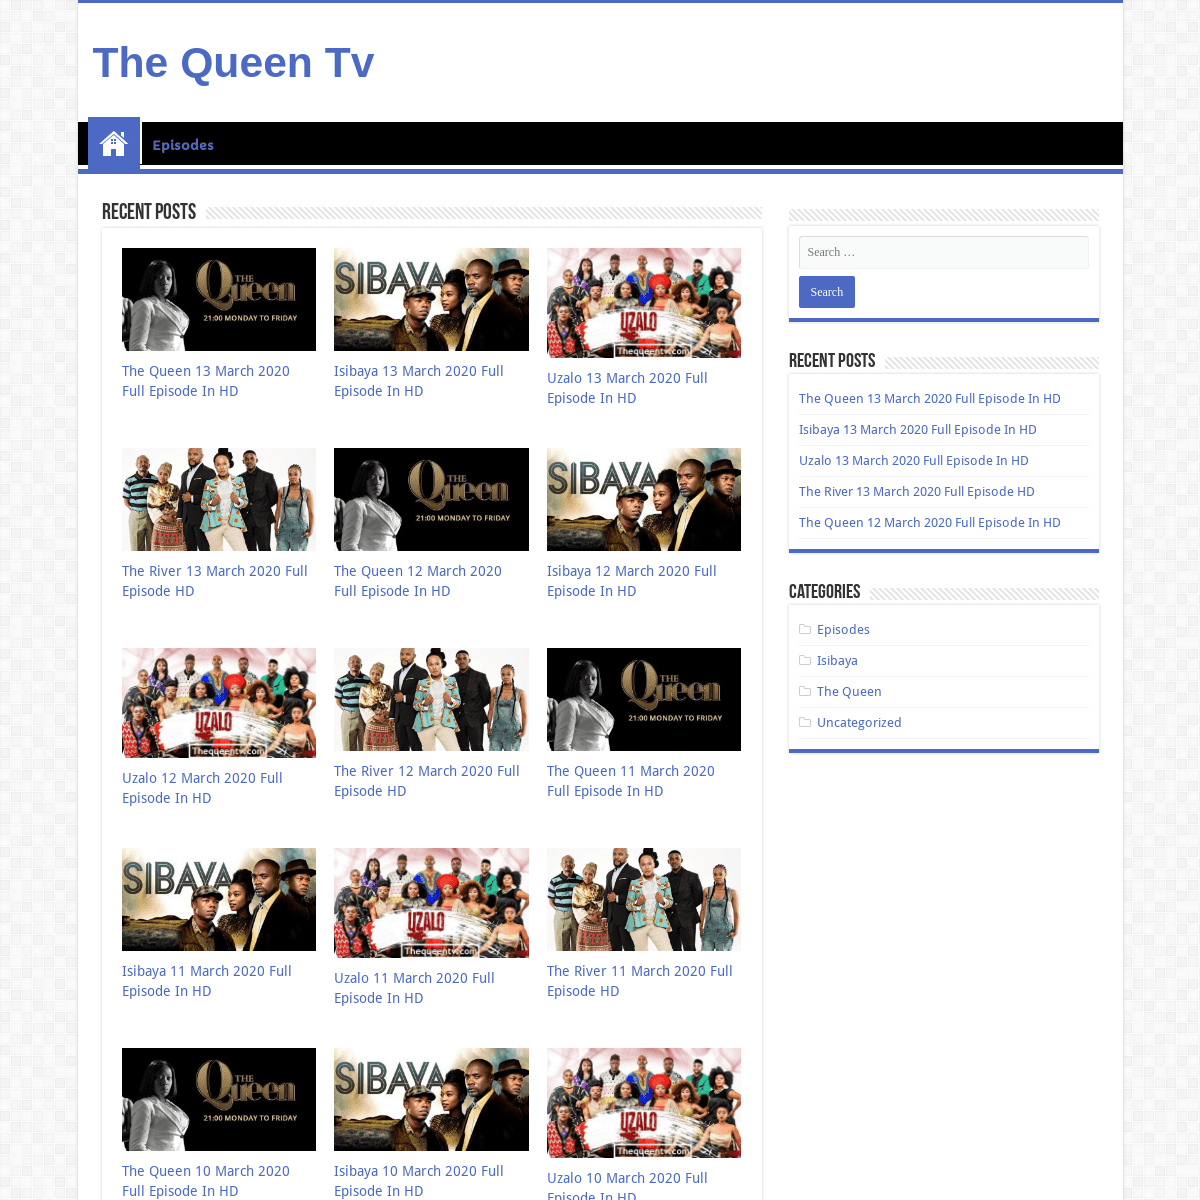 A complete backup of thequeentv.com